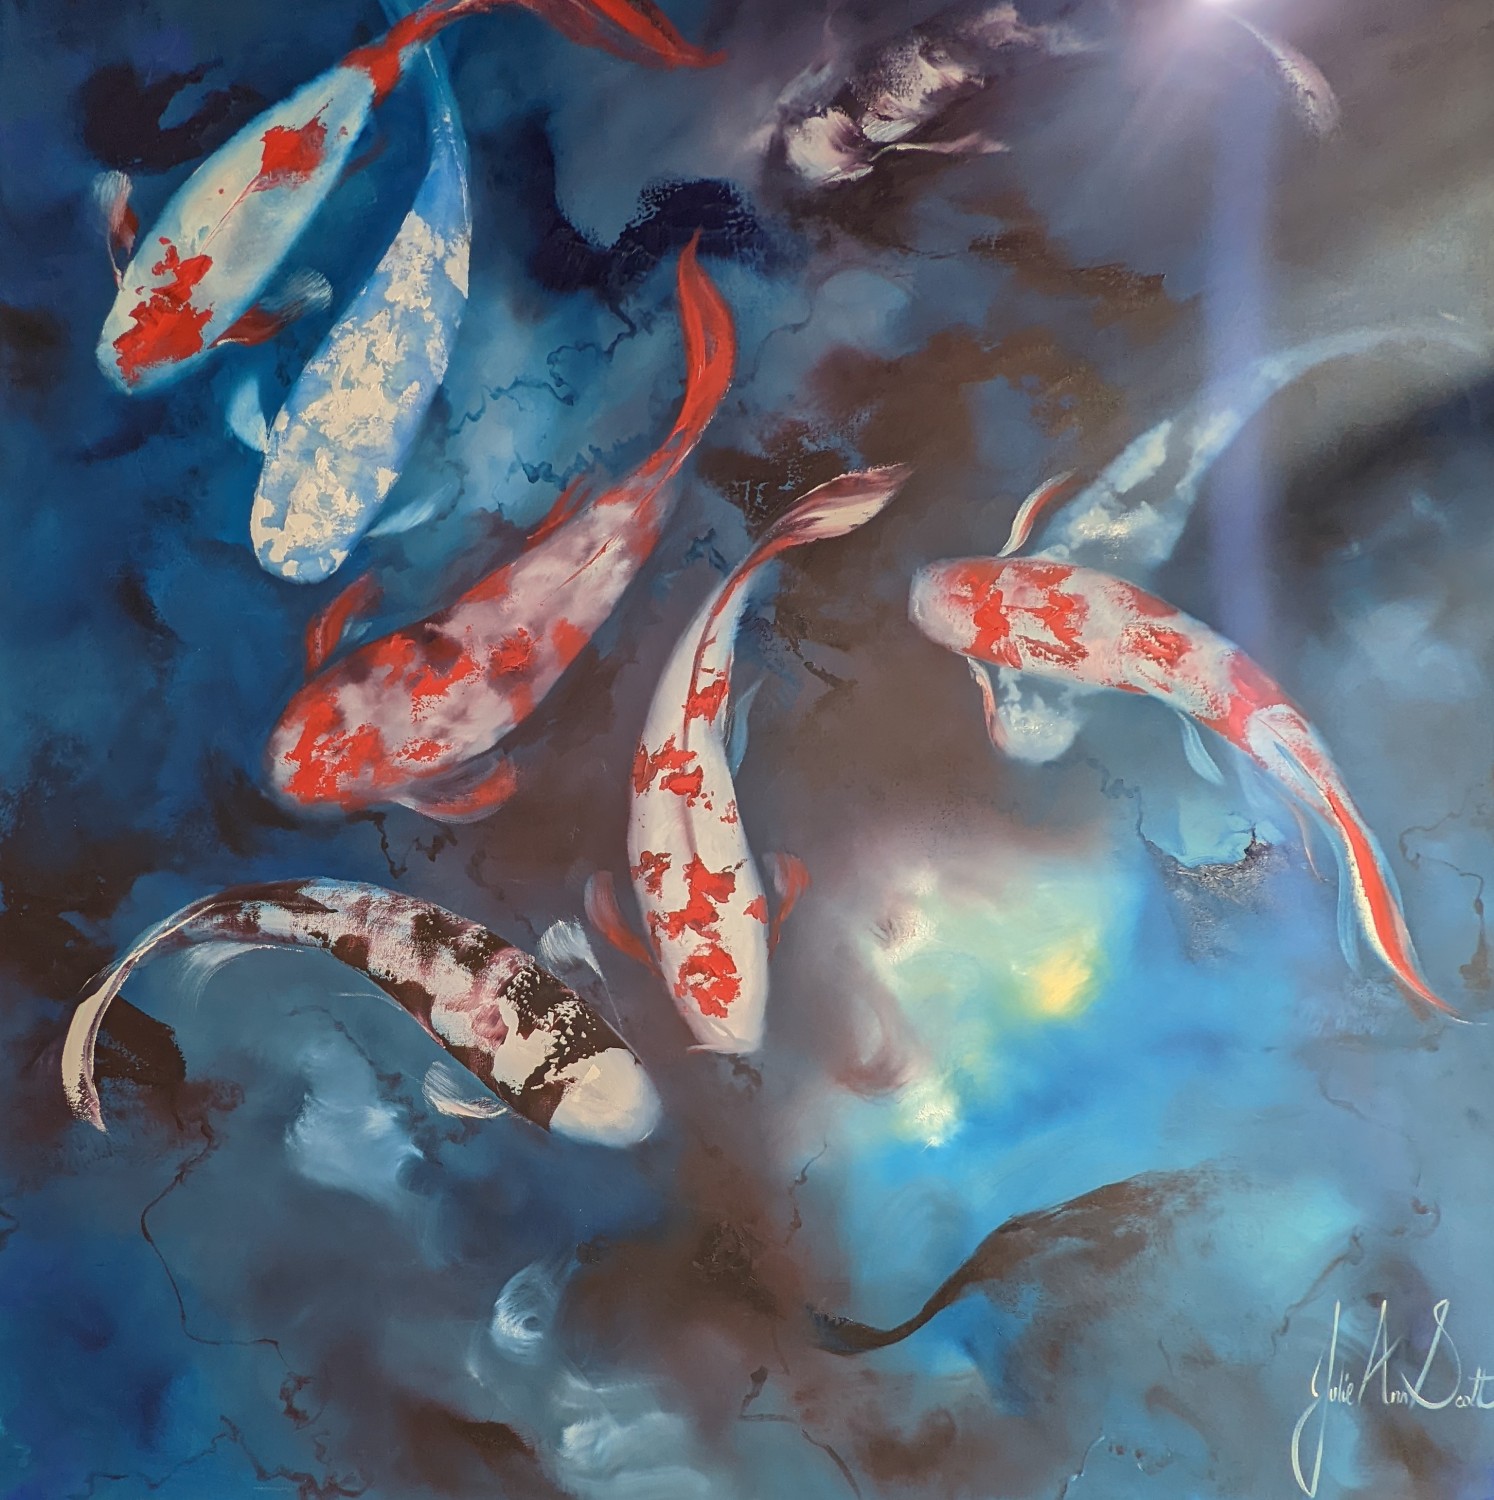 AUTUMN AND KOI FISH - JAPANESE CARP - RED, BLUE AND YELLOW - WATERCOLOUR